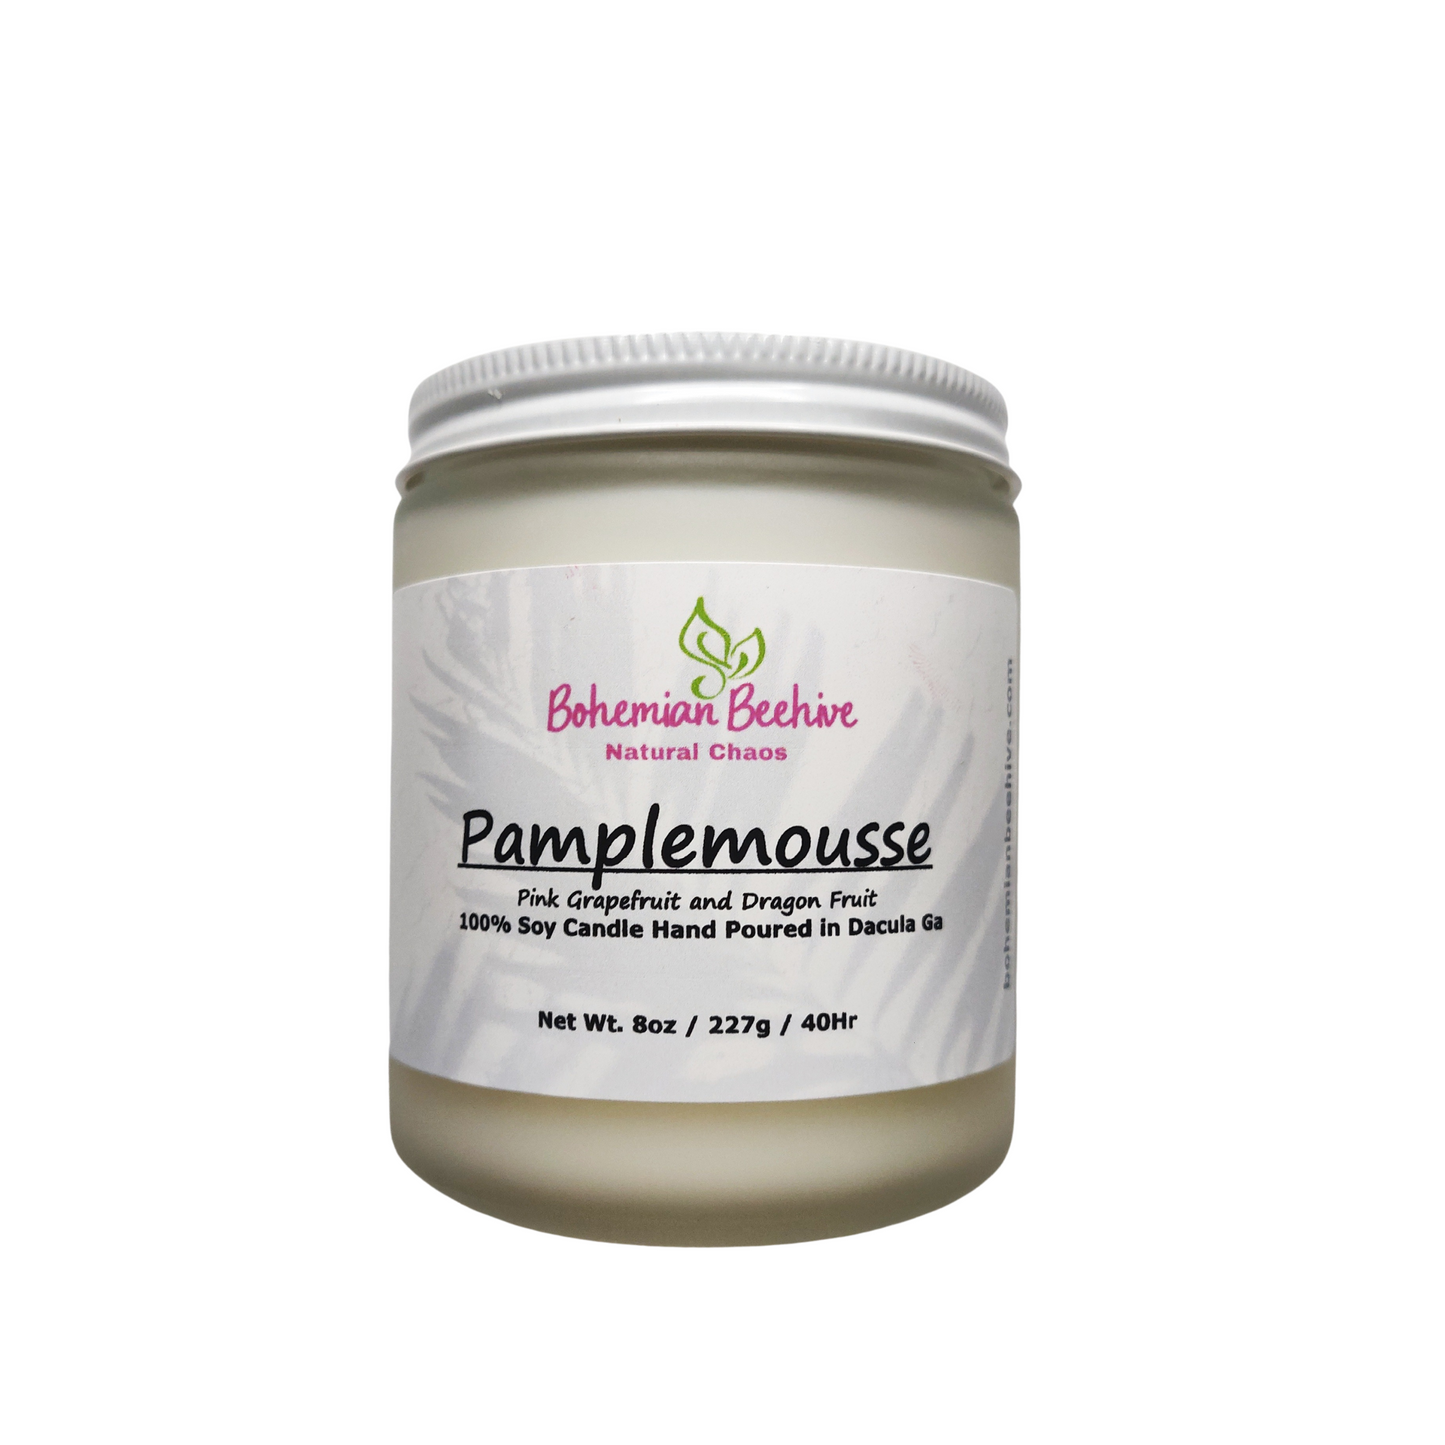 Pamplemousse Soy Candle